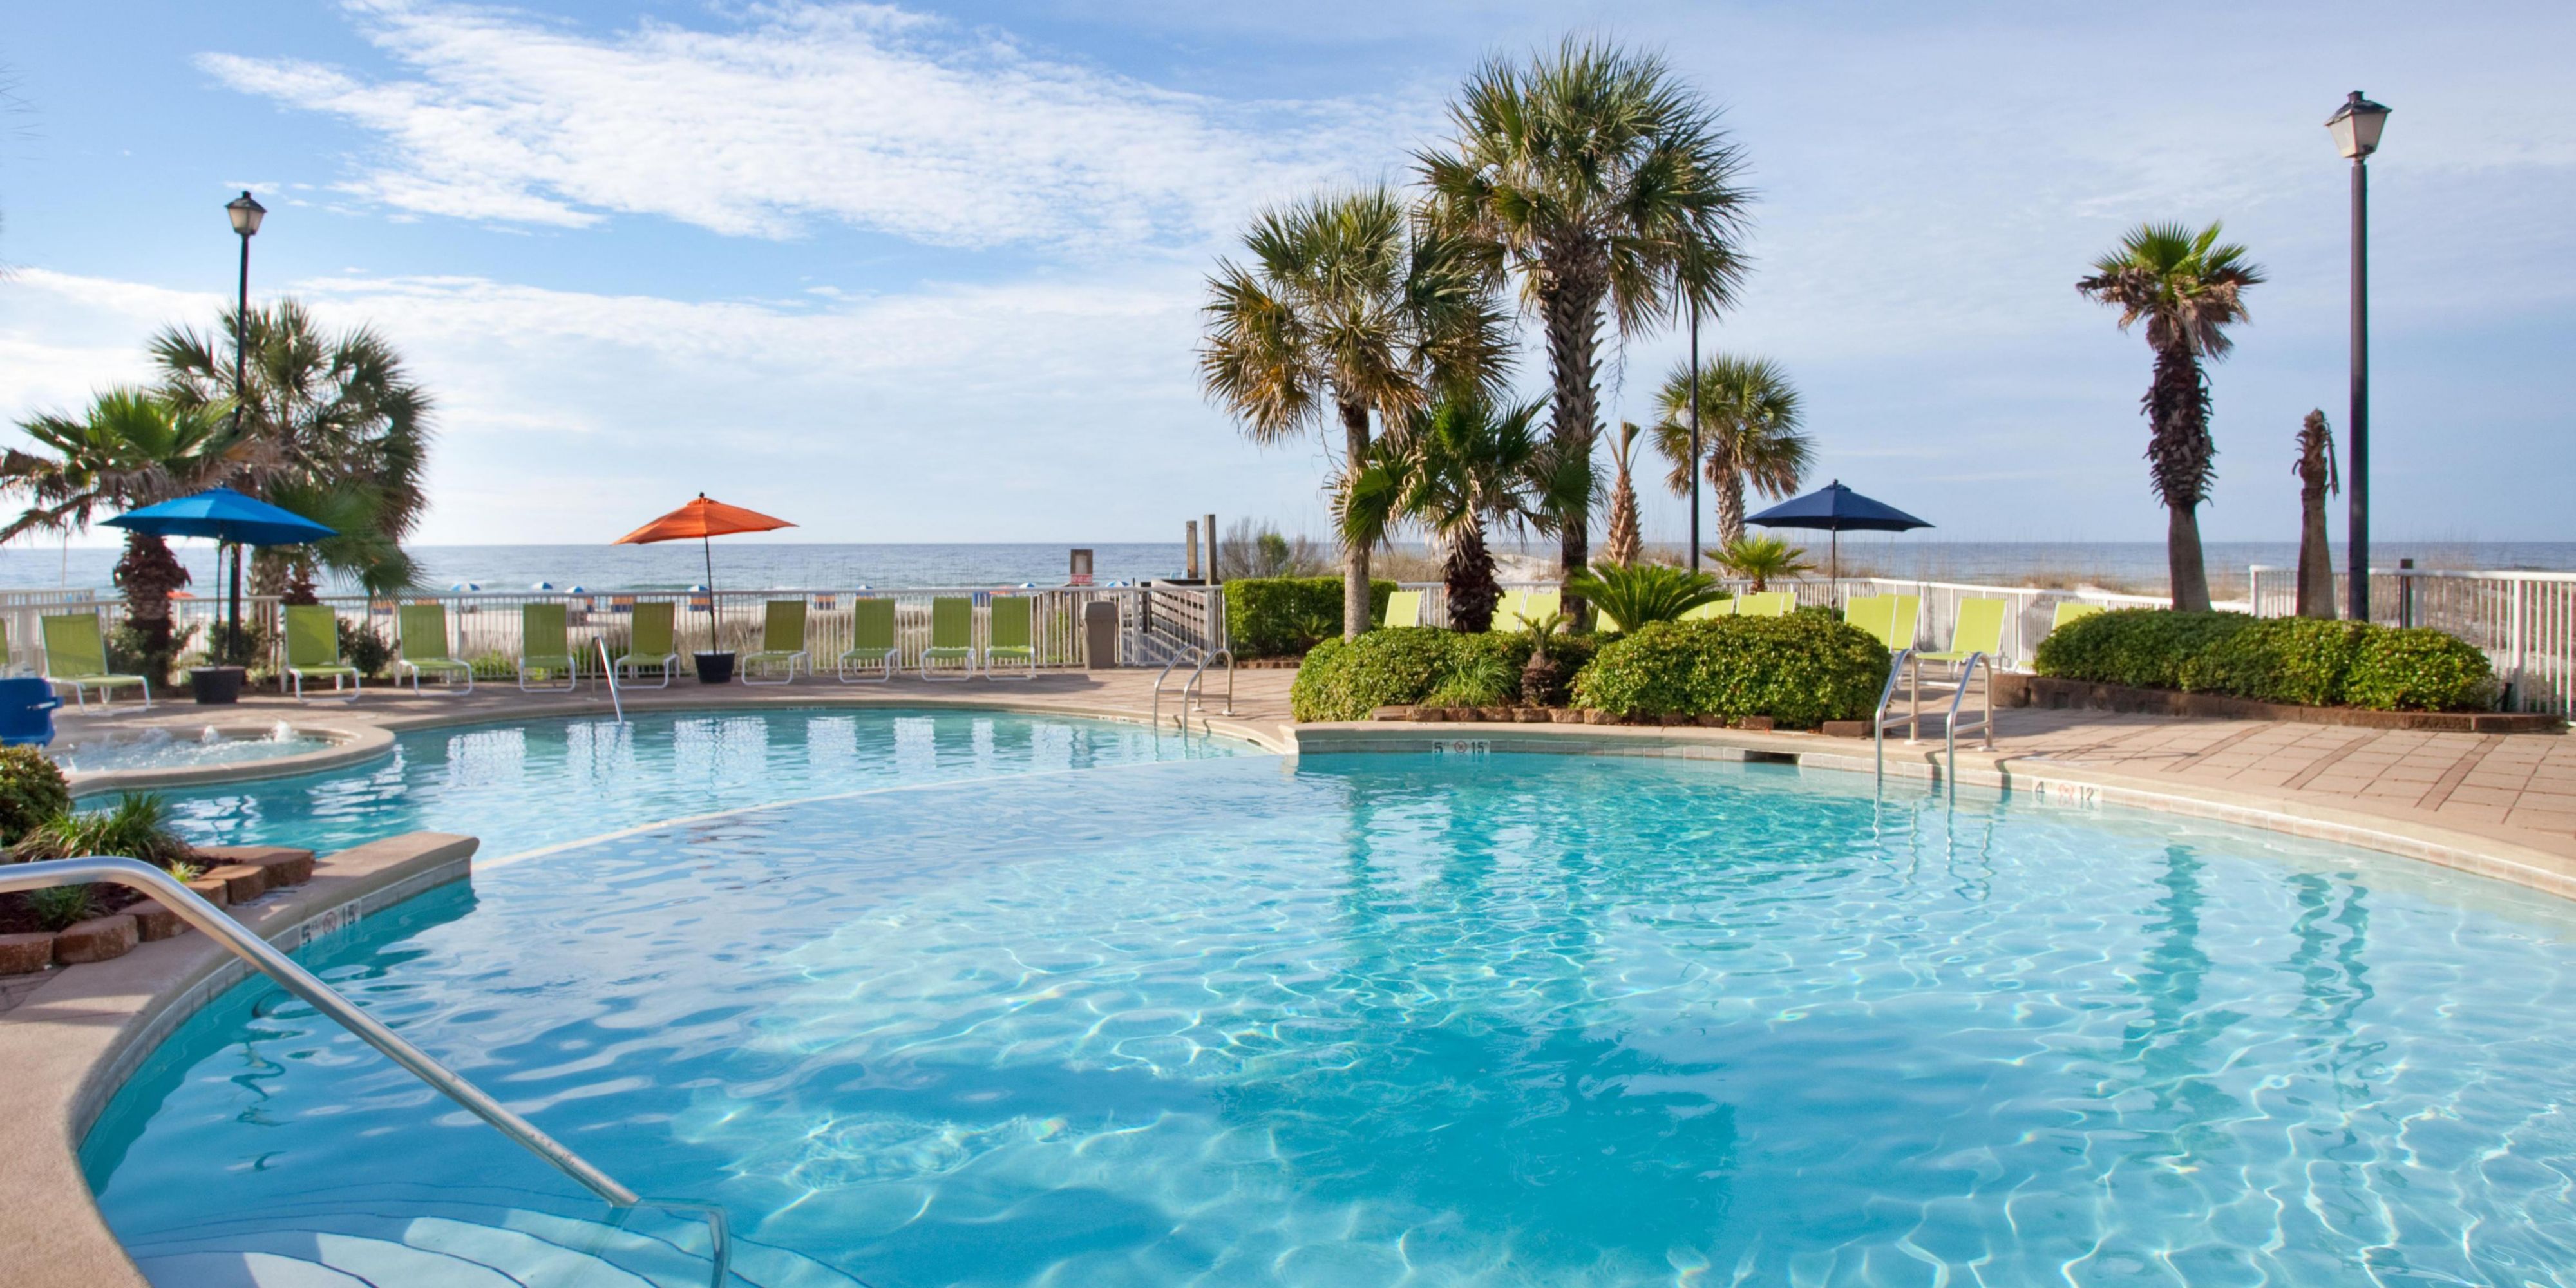 Our pool deck overlooking the Gulf of Mexico is also home to a seasonal poolside tiki bar, where live music and cold drinks are what we’re serving up – with an extra dose of fun.